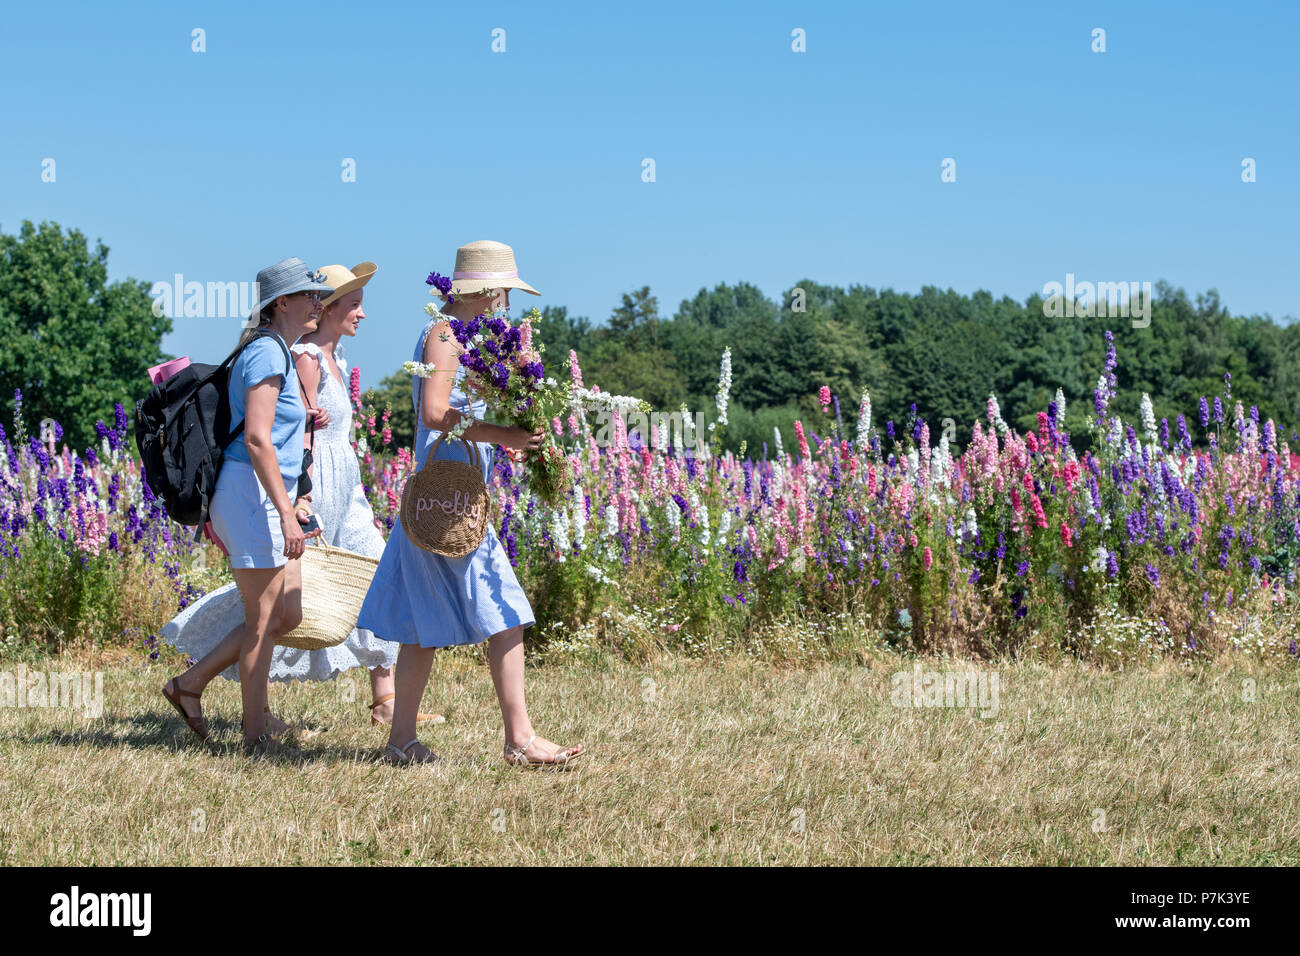 Photographer and models with Delphiniums grown in a field at the Real Flower Petal Confetti company flower fields in Wick, Pershore, UK Stock Photo